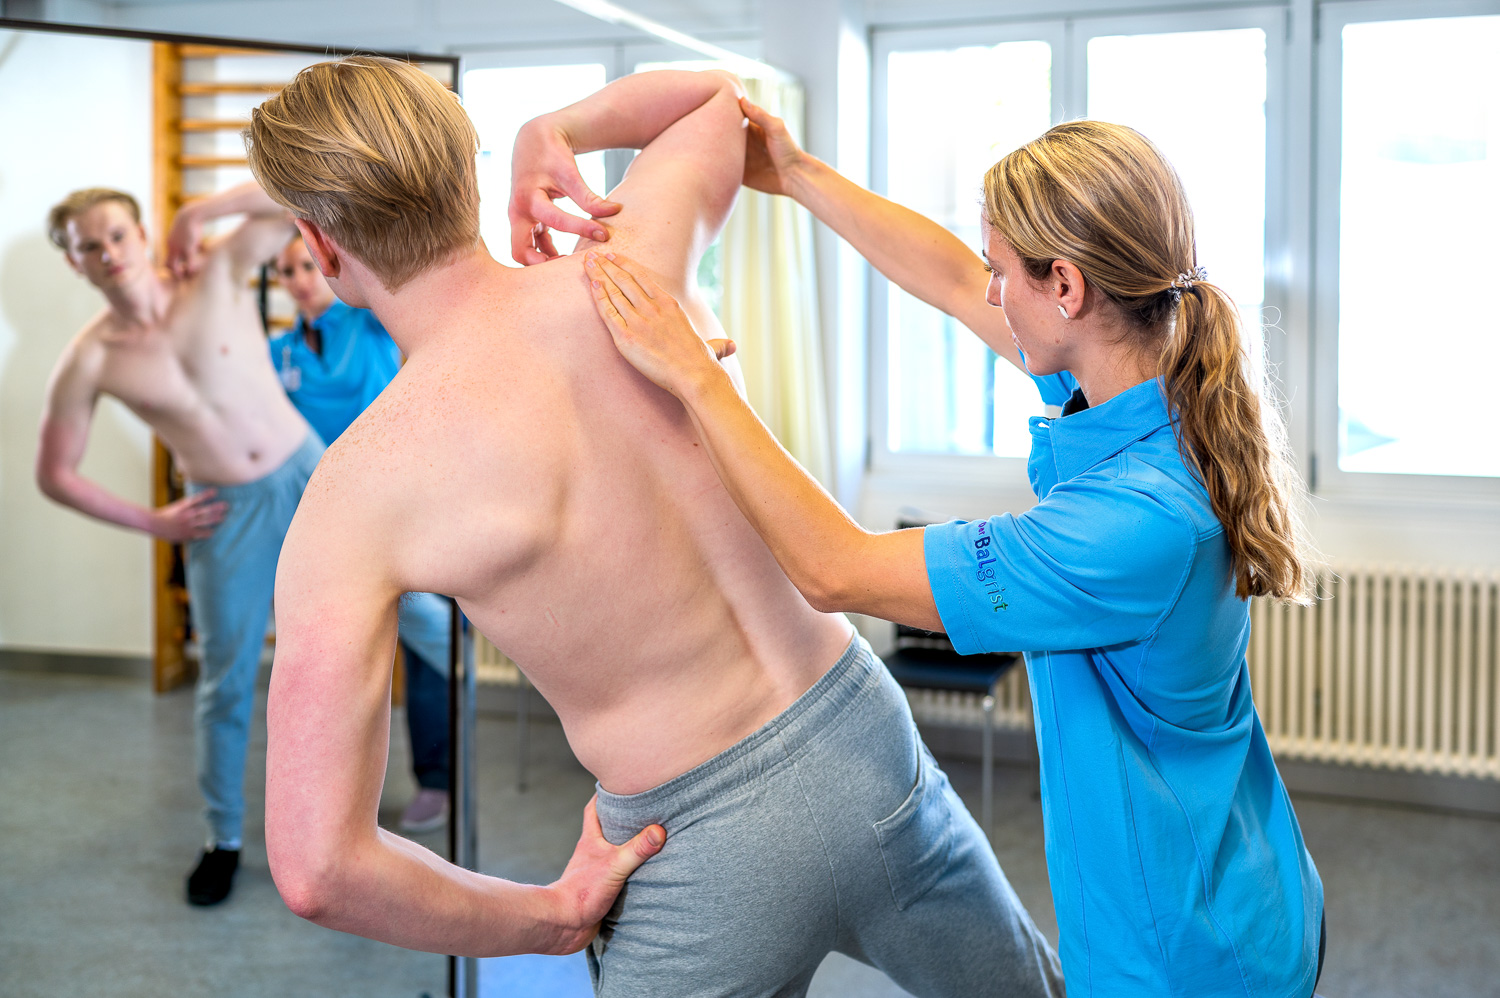 A physiotherapist is doing exercises with the patient in front of a mirror.